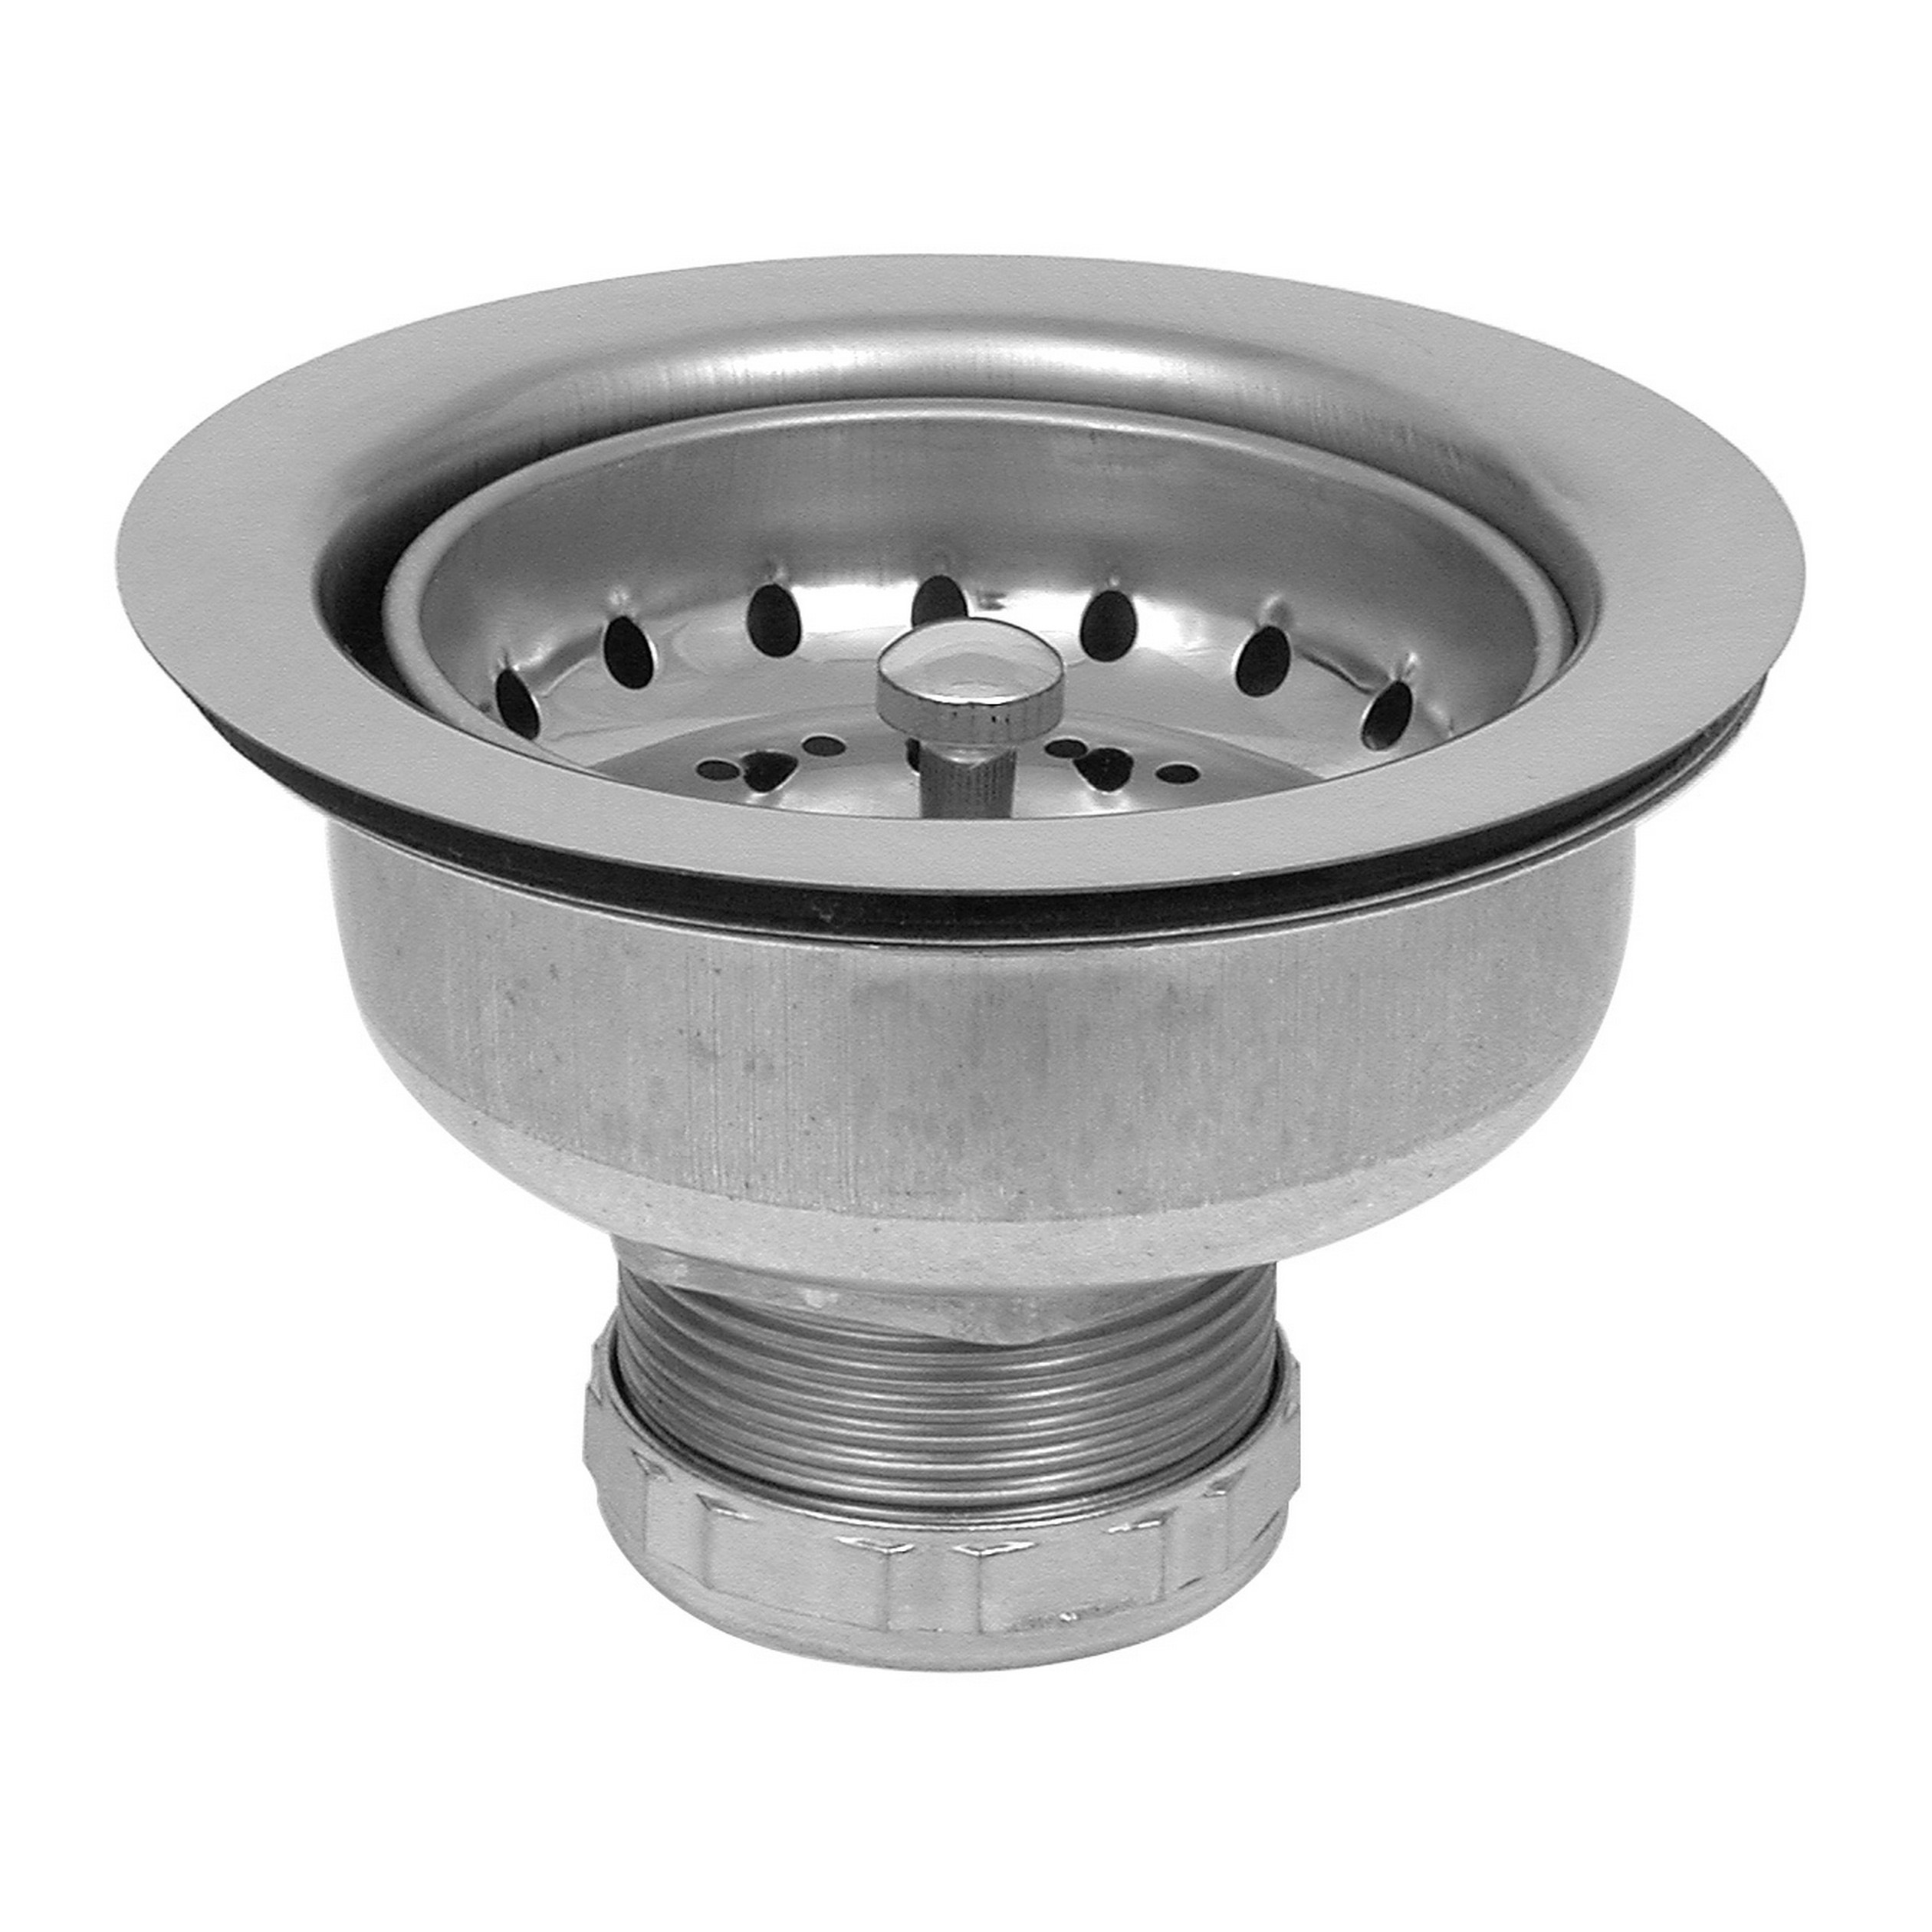 Sink Drains & Strainers